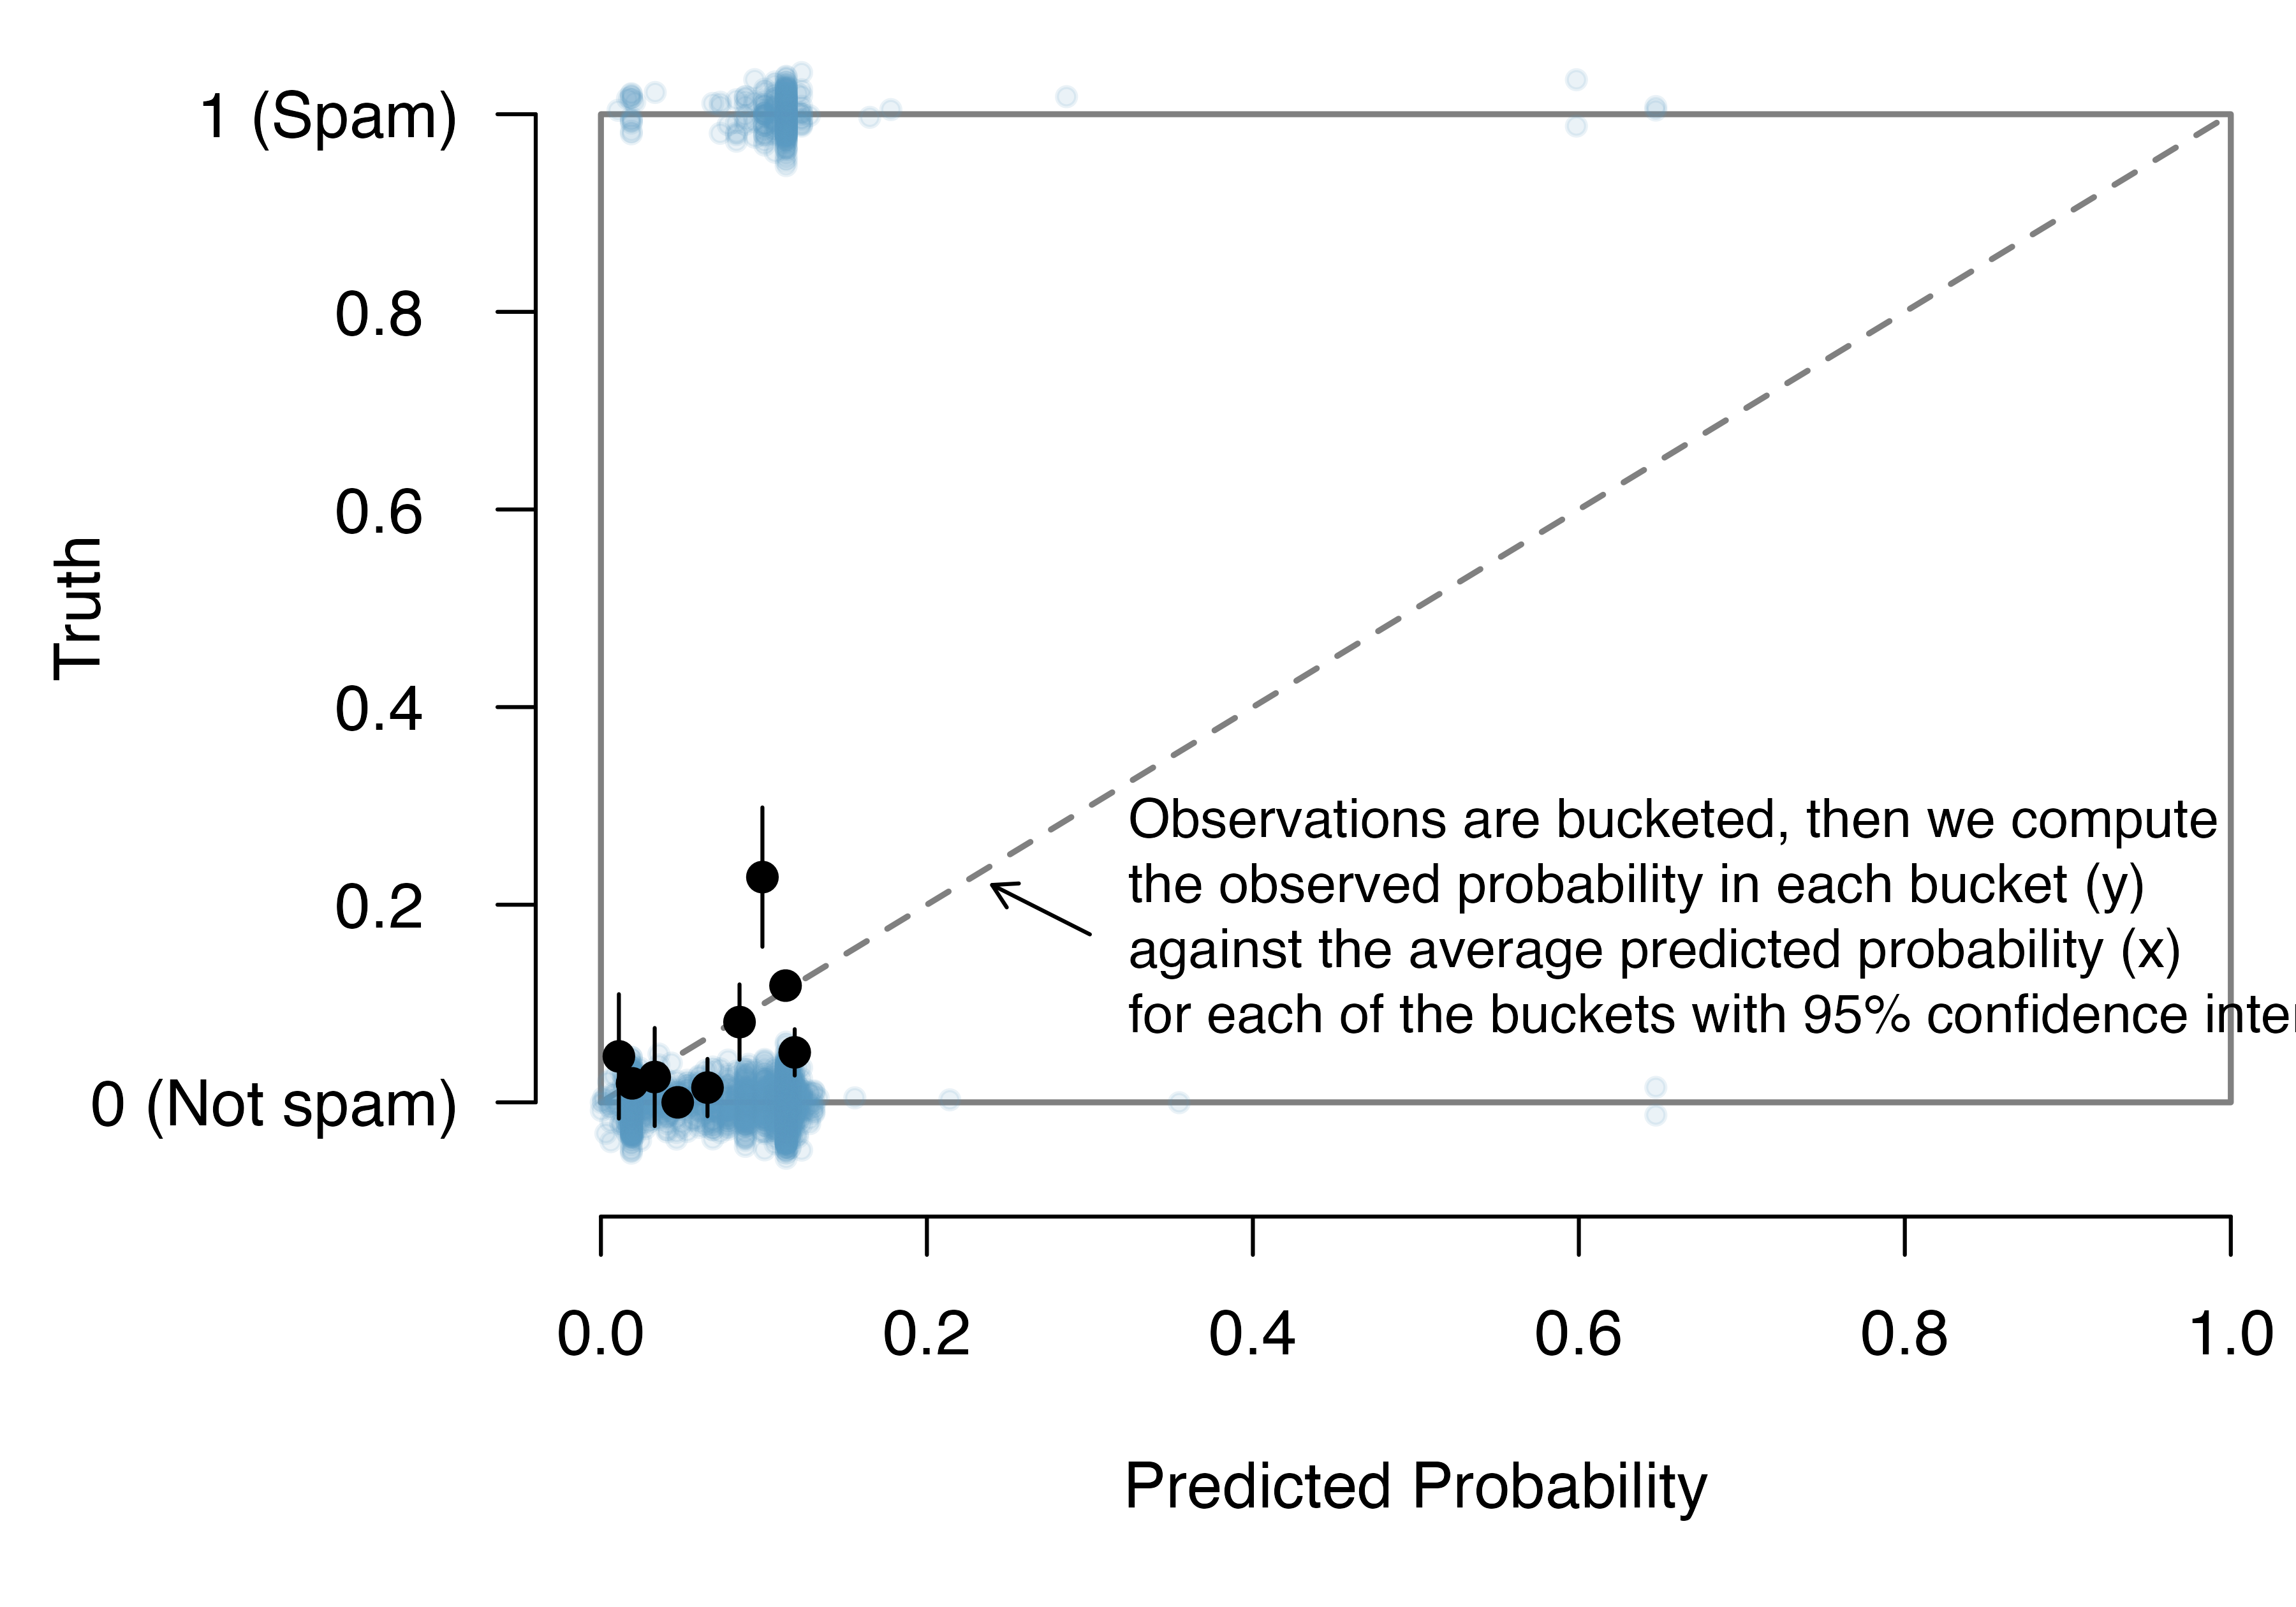 Scatterplot with predicted probability of being spam on the x-axis and original class, either spam or not spam, on the y-axis. Superimposed are the observed probabilities of being spam, calculated by the proportion of spam emails in each bucket of predicted probabilities.  The observed probabilities and predicted probabilities line up reasonably well.